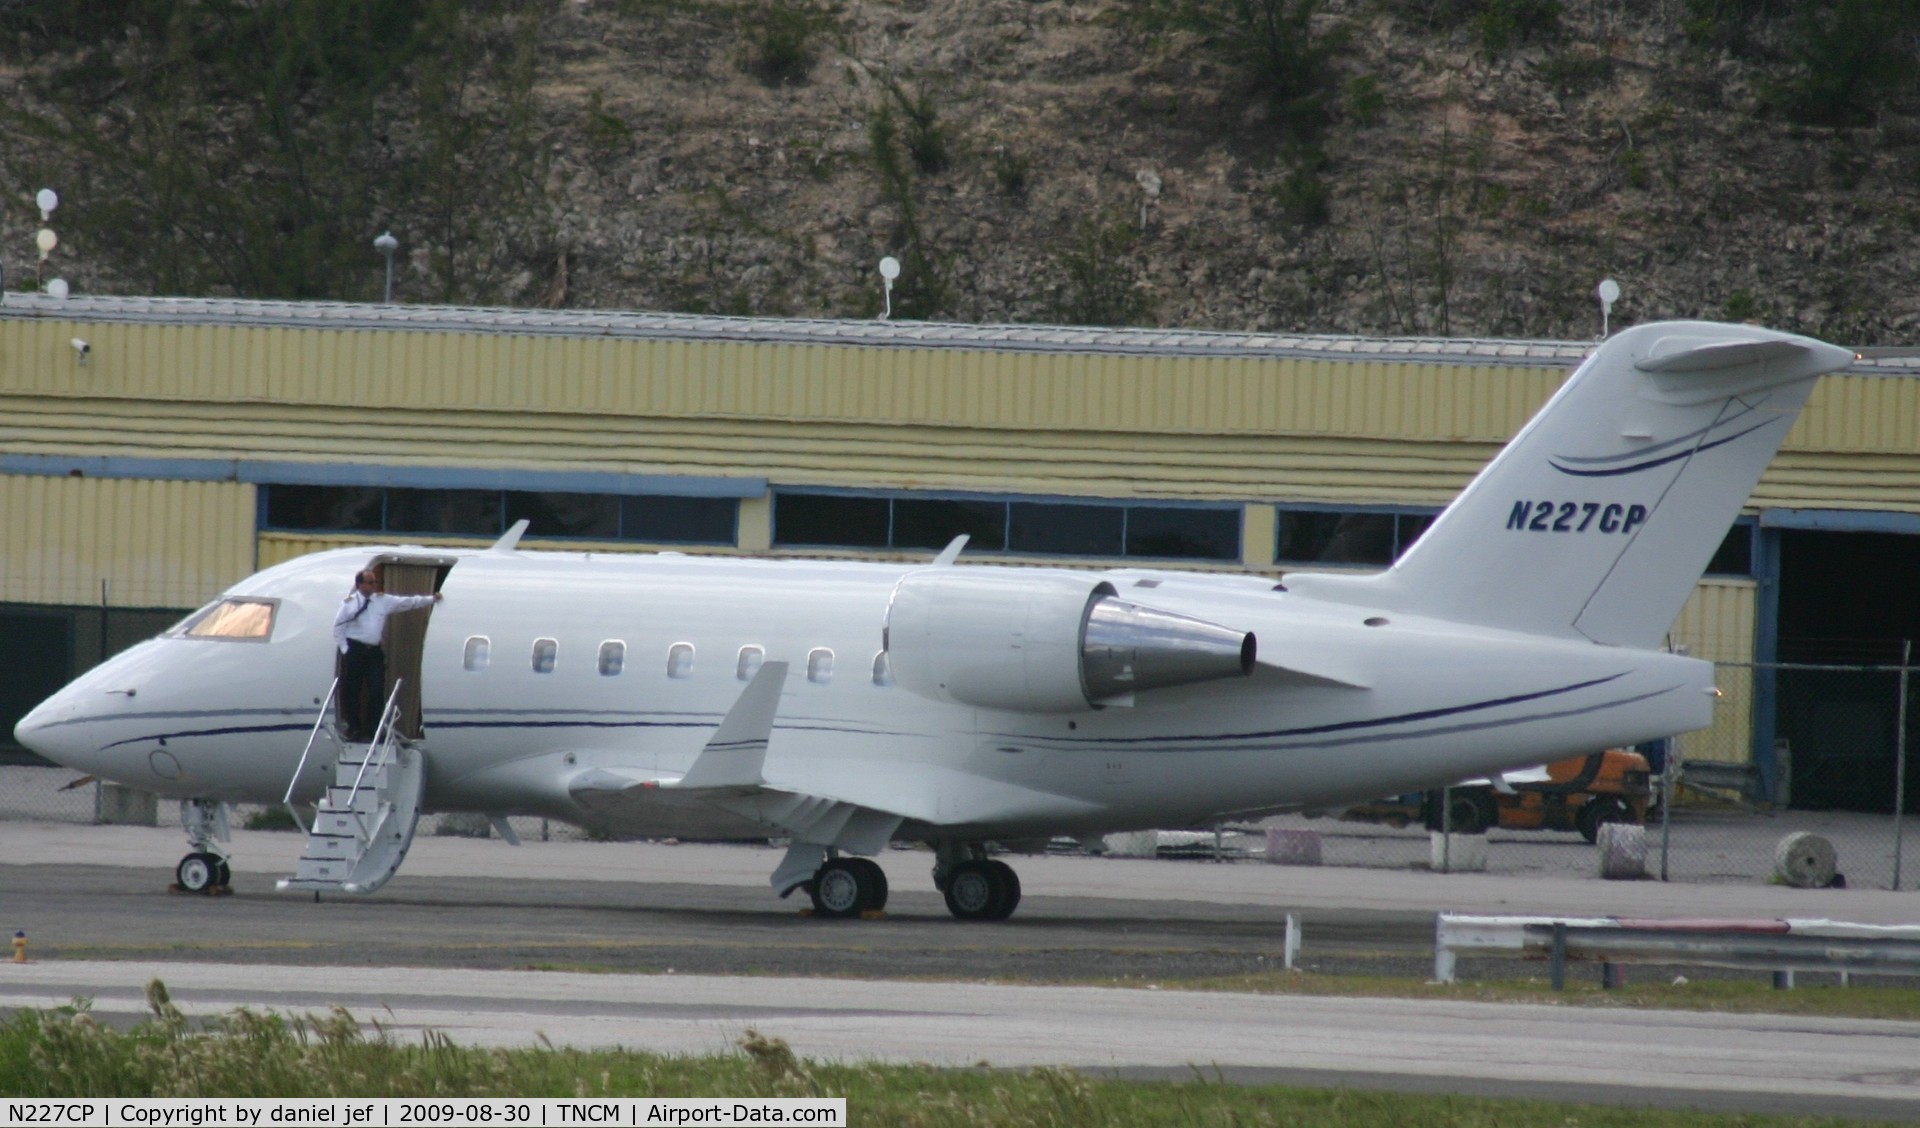 N227CP, 1991 Canadair Challenger 601-3R (CL-600-2B16) C/N 5097, waiting on there passengers. on the cargo ramp